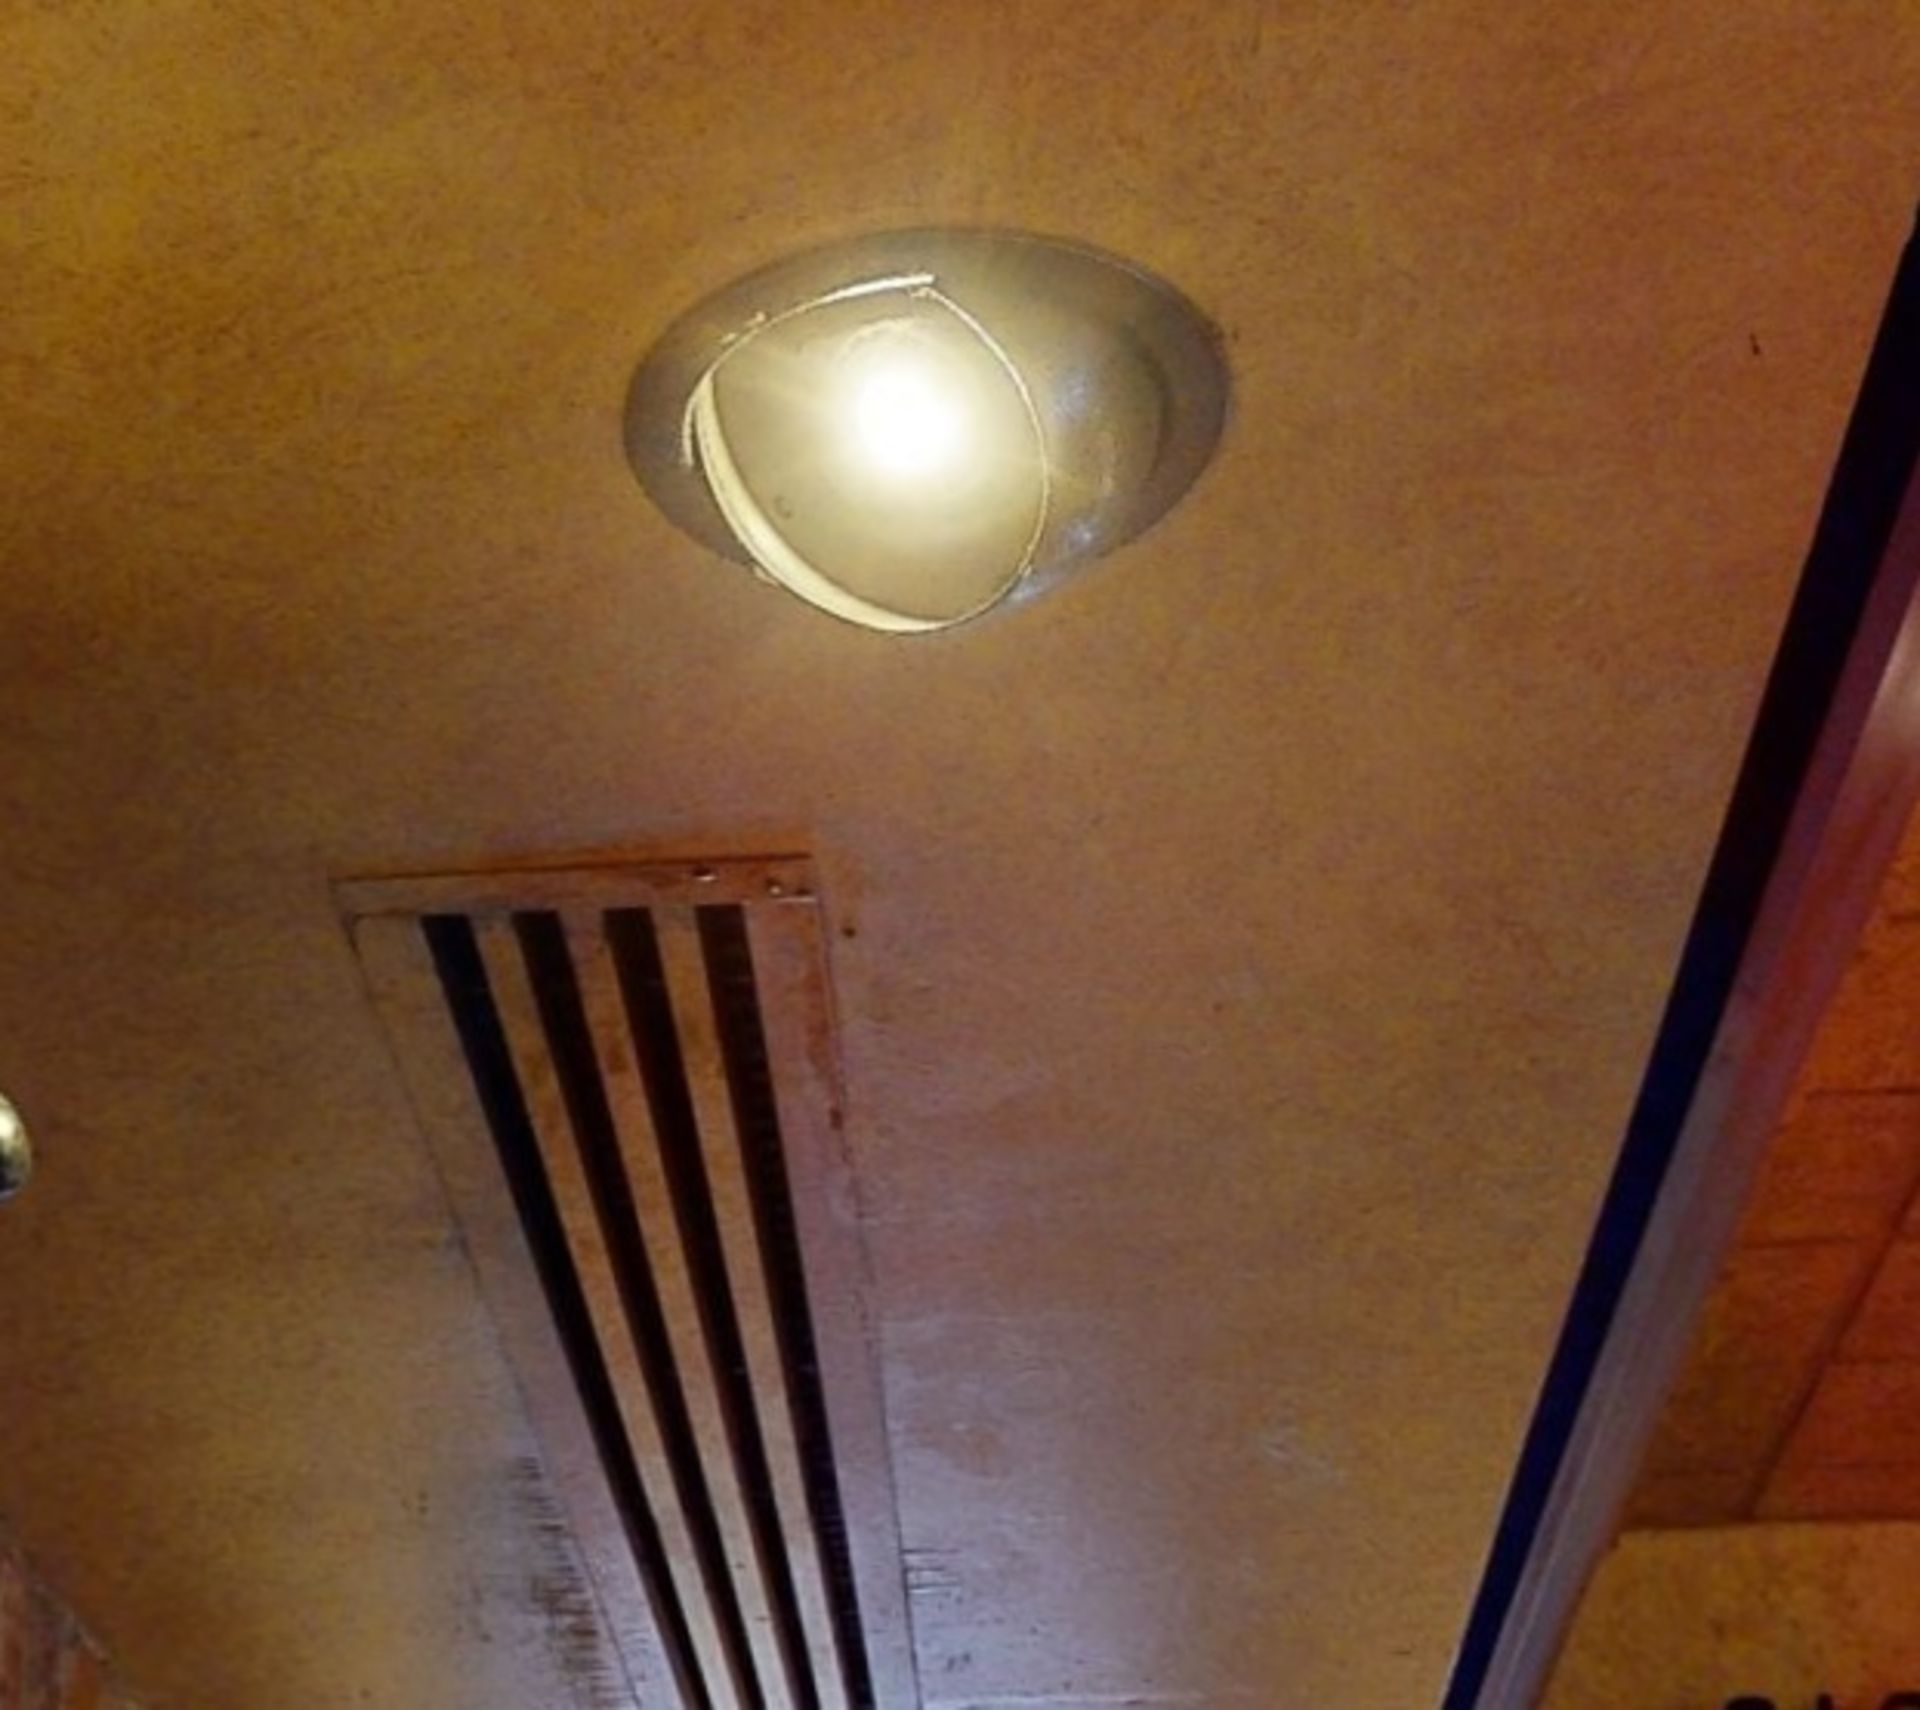 4 x Directional Restaurant Ceiling Lights - 20cm Diameter - From a Popular American Diner - - Image 2 of 2